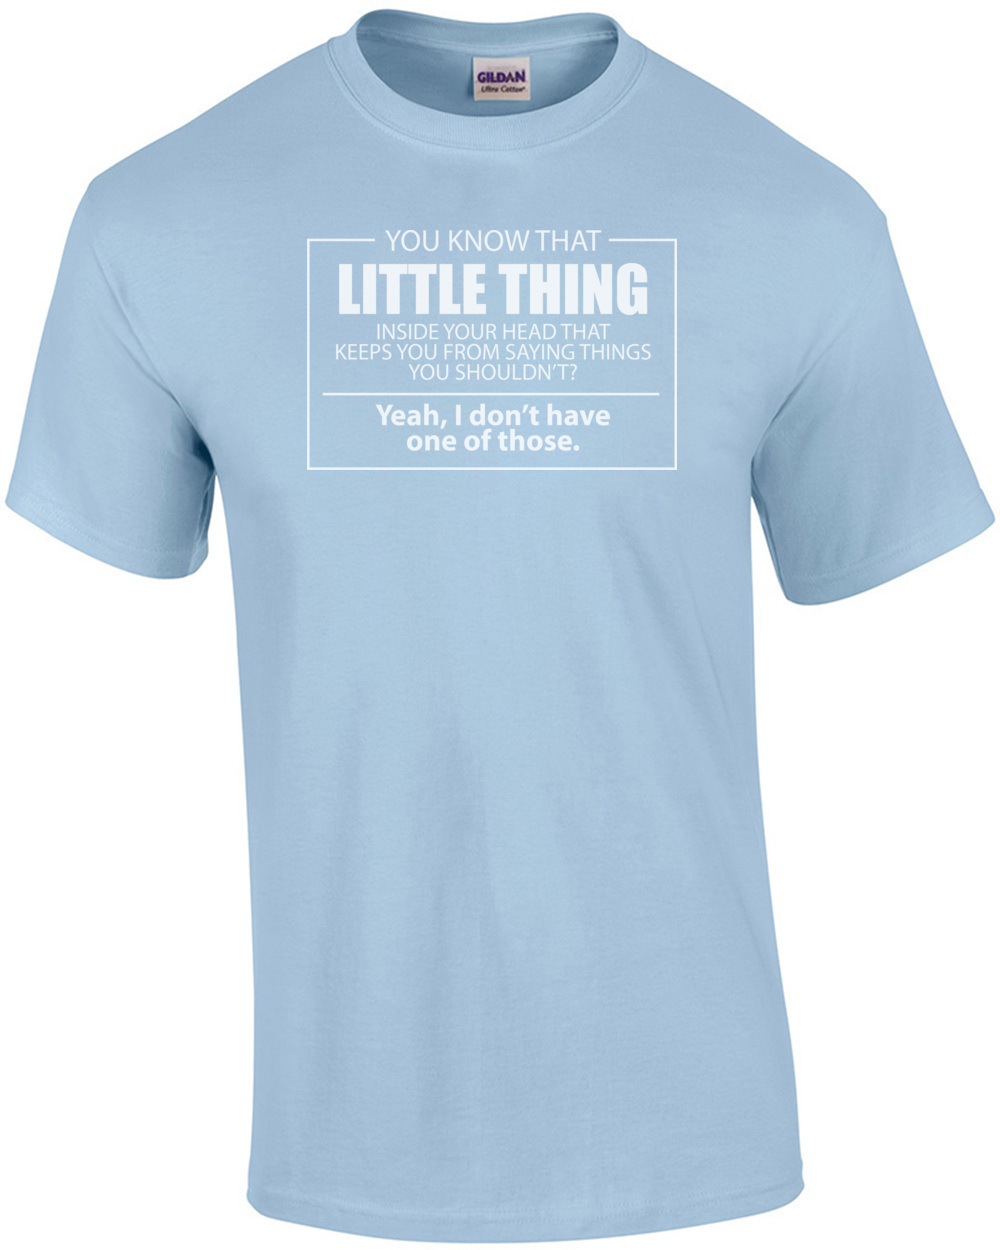 You Know That Little Thing Inside Your Head - Funny T-shirt | eBay